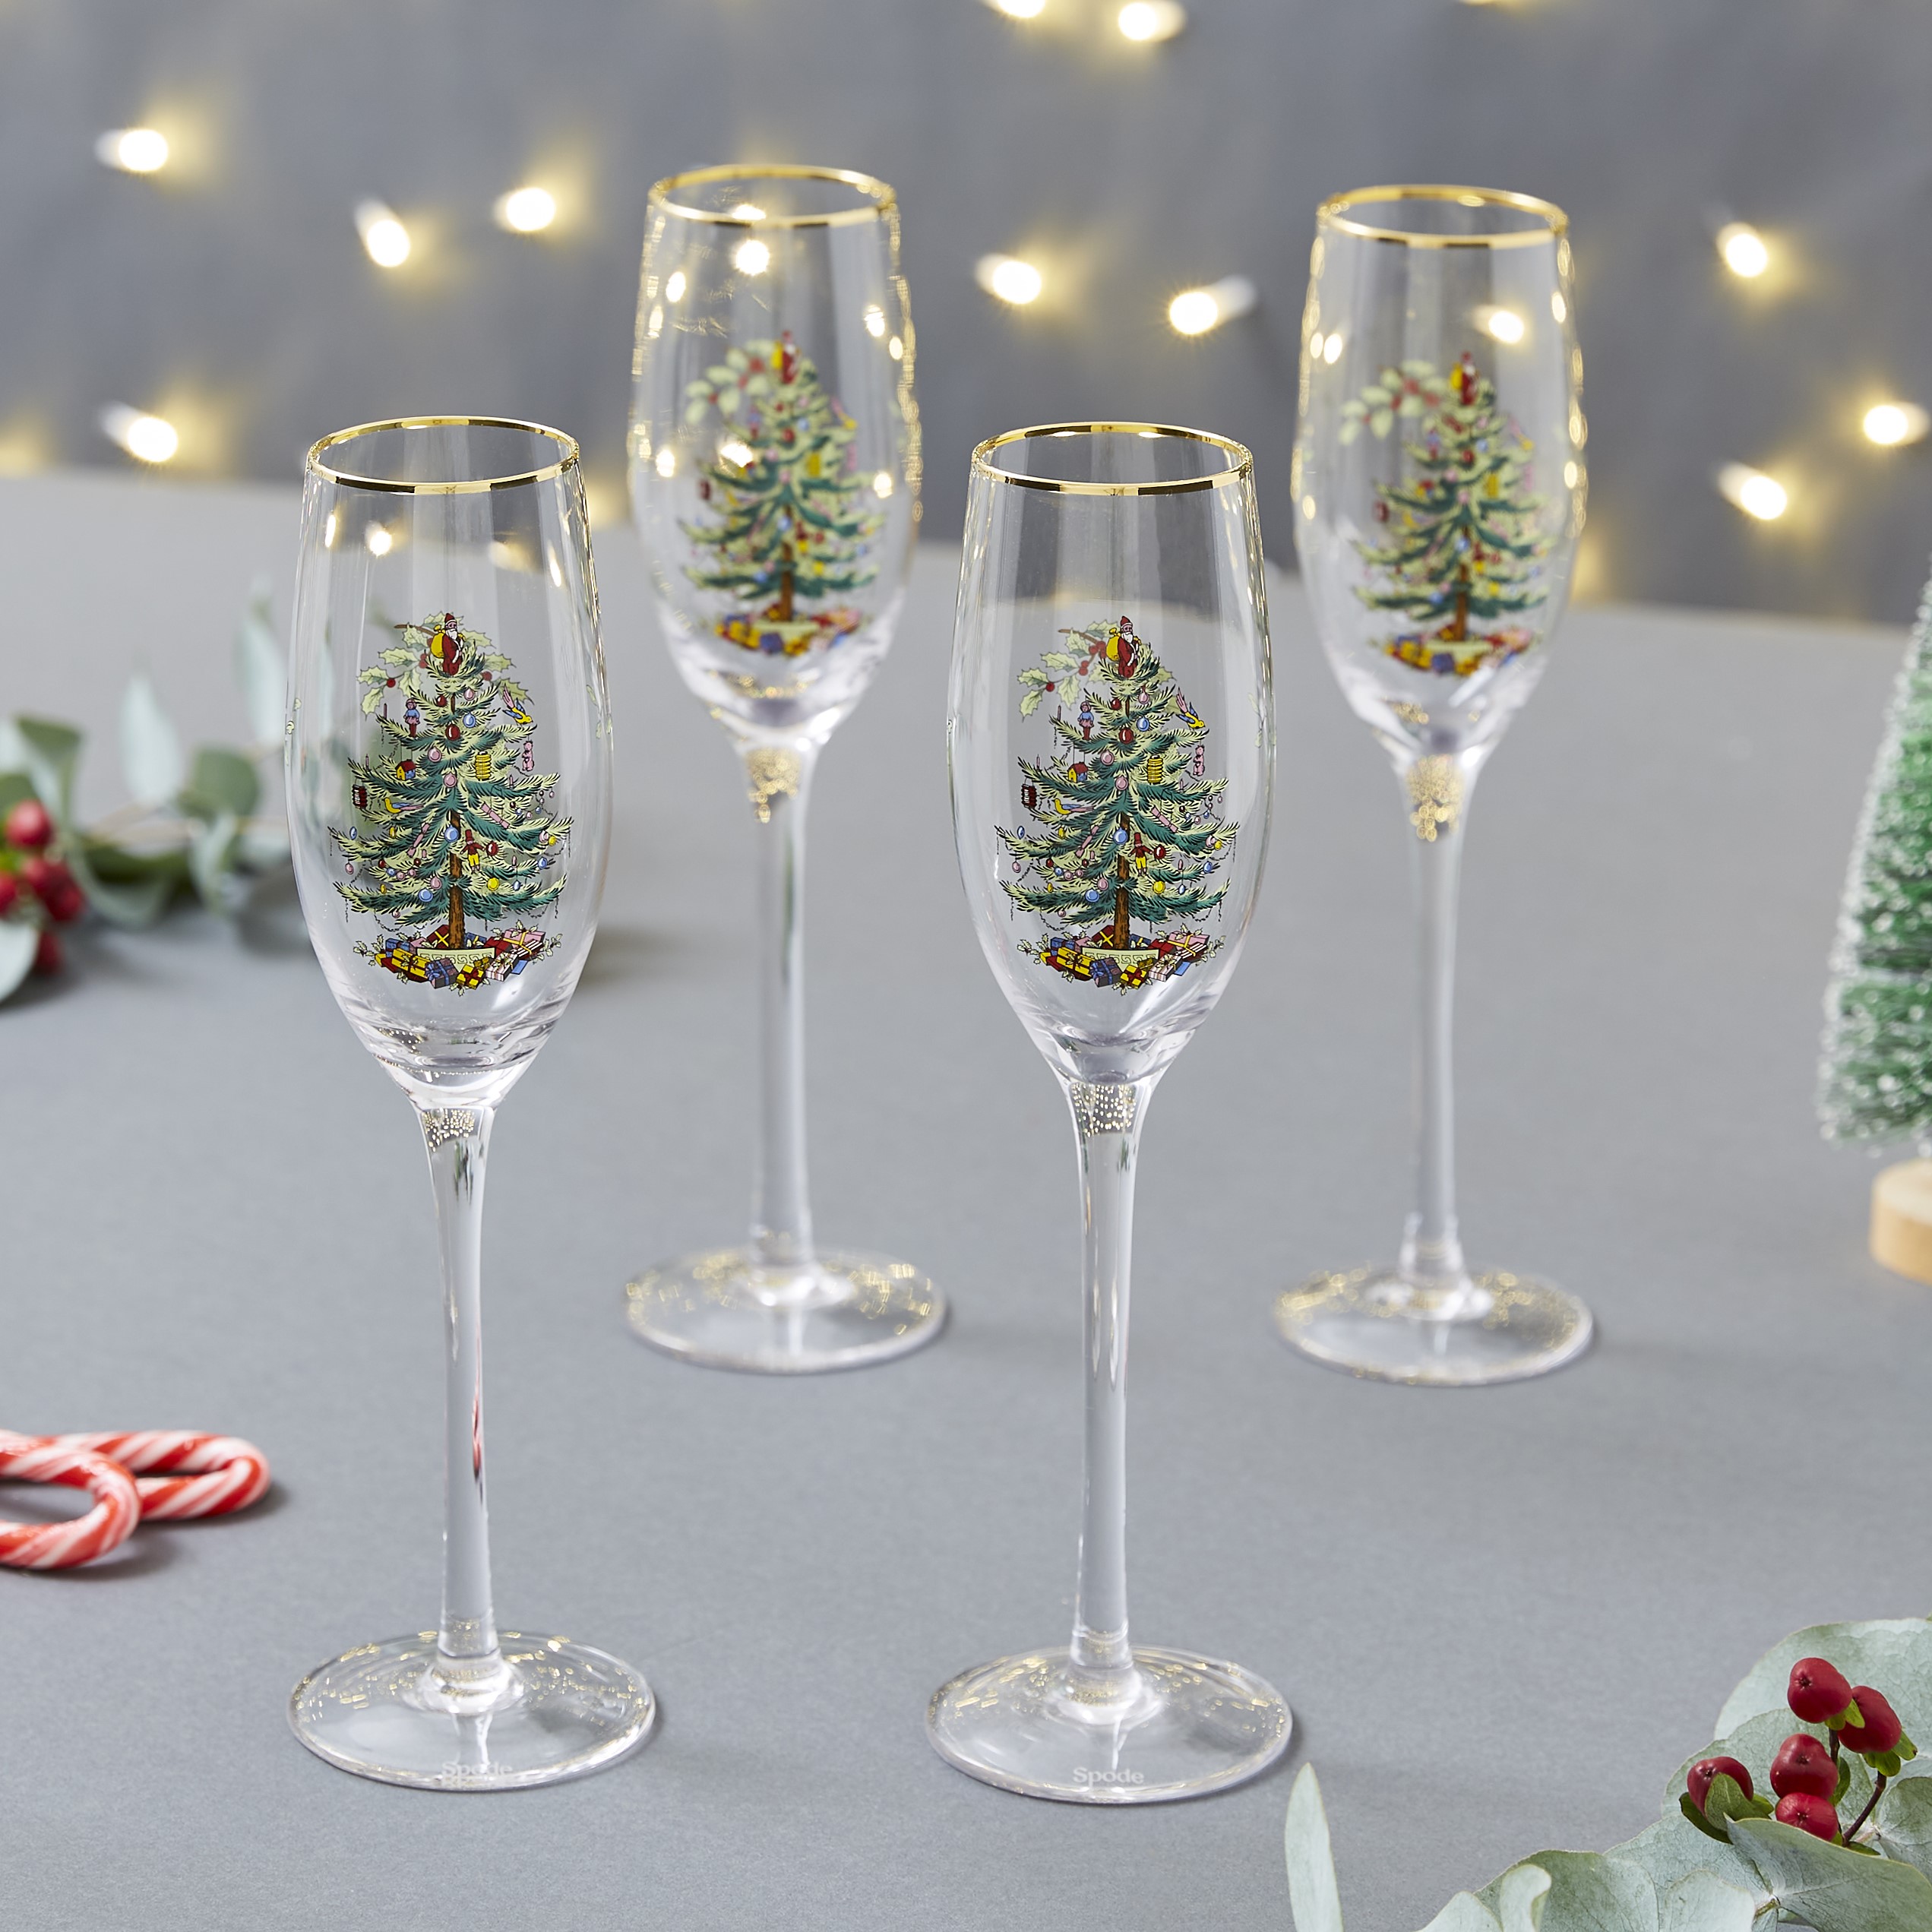 Spode Christmas Tree Champagne Flutes (Set of 4)